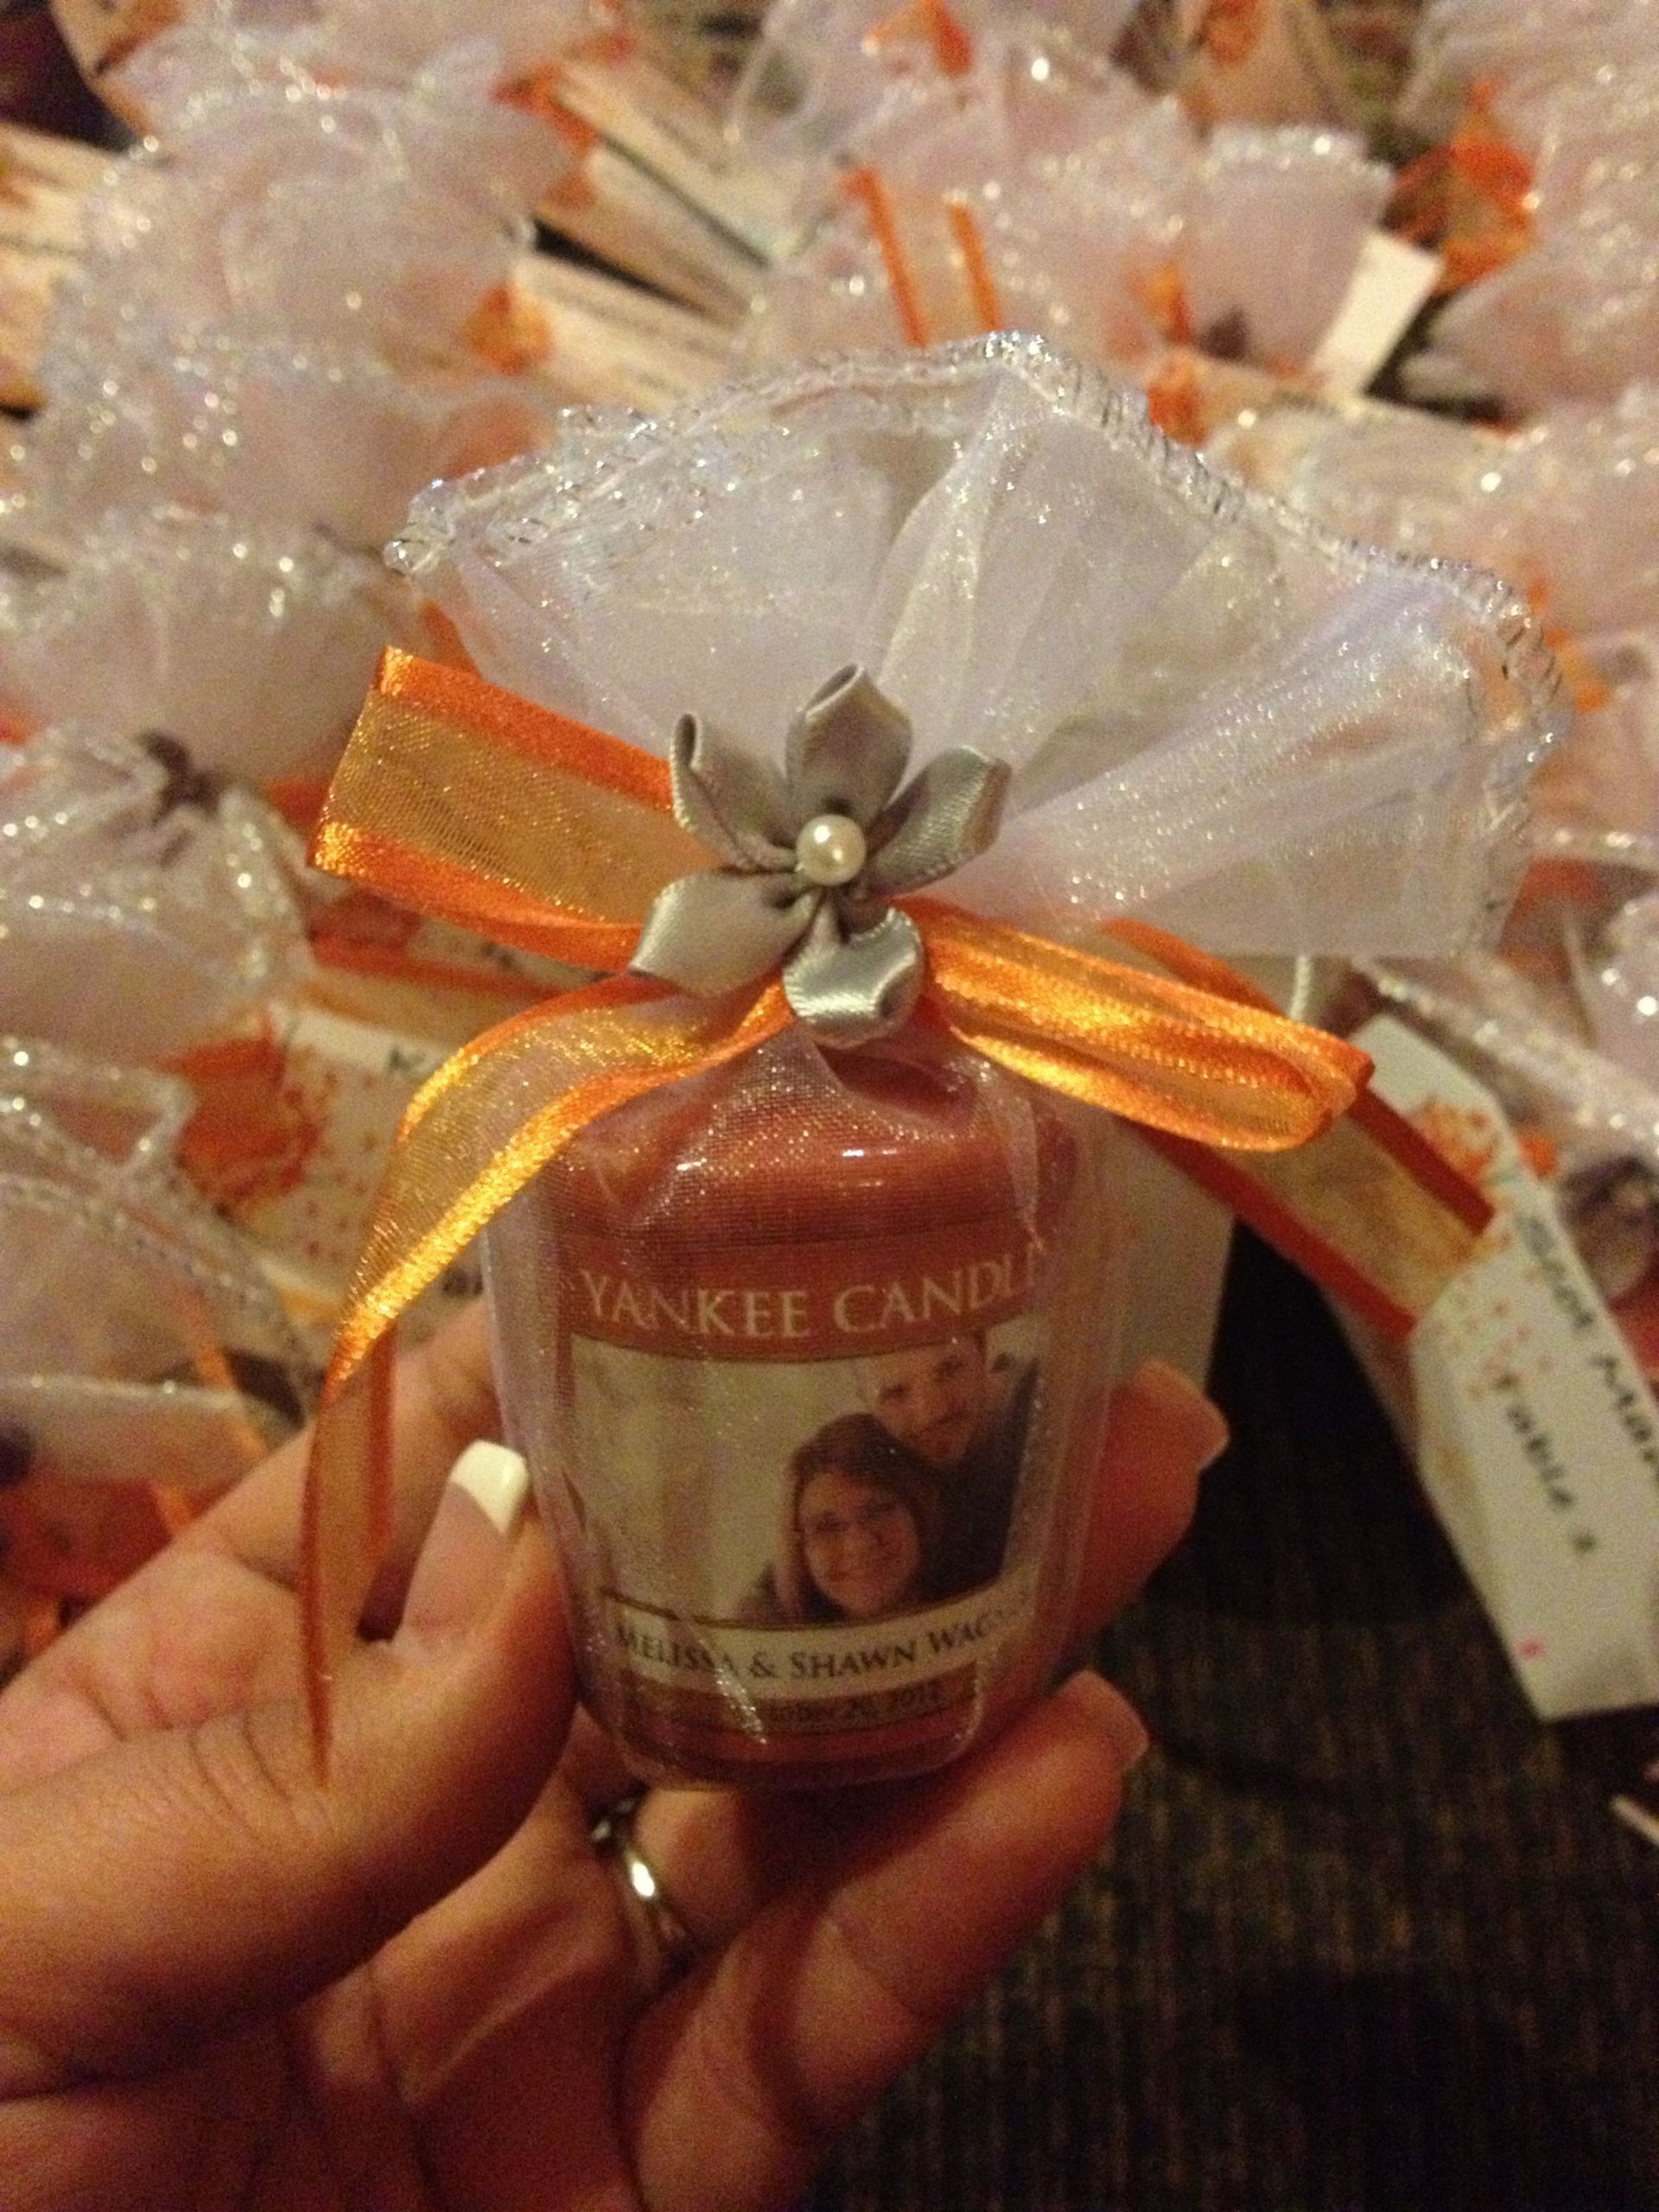 Yankee Candle Wedding Favors
 Yankee candles for party favors